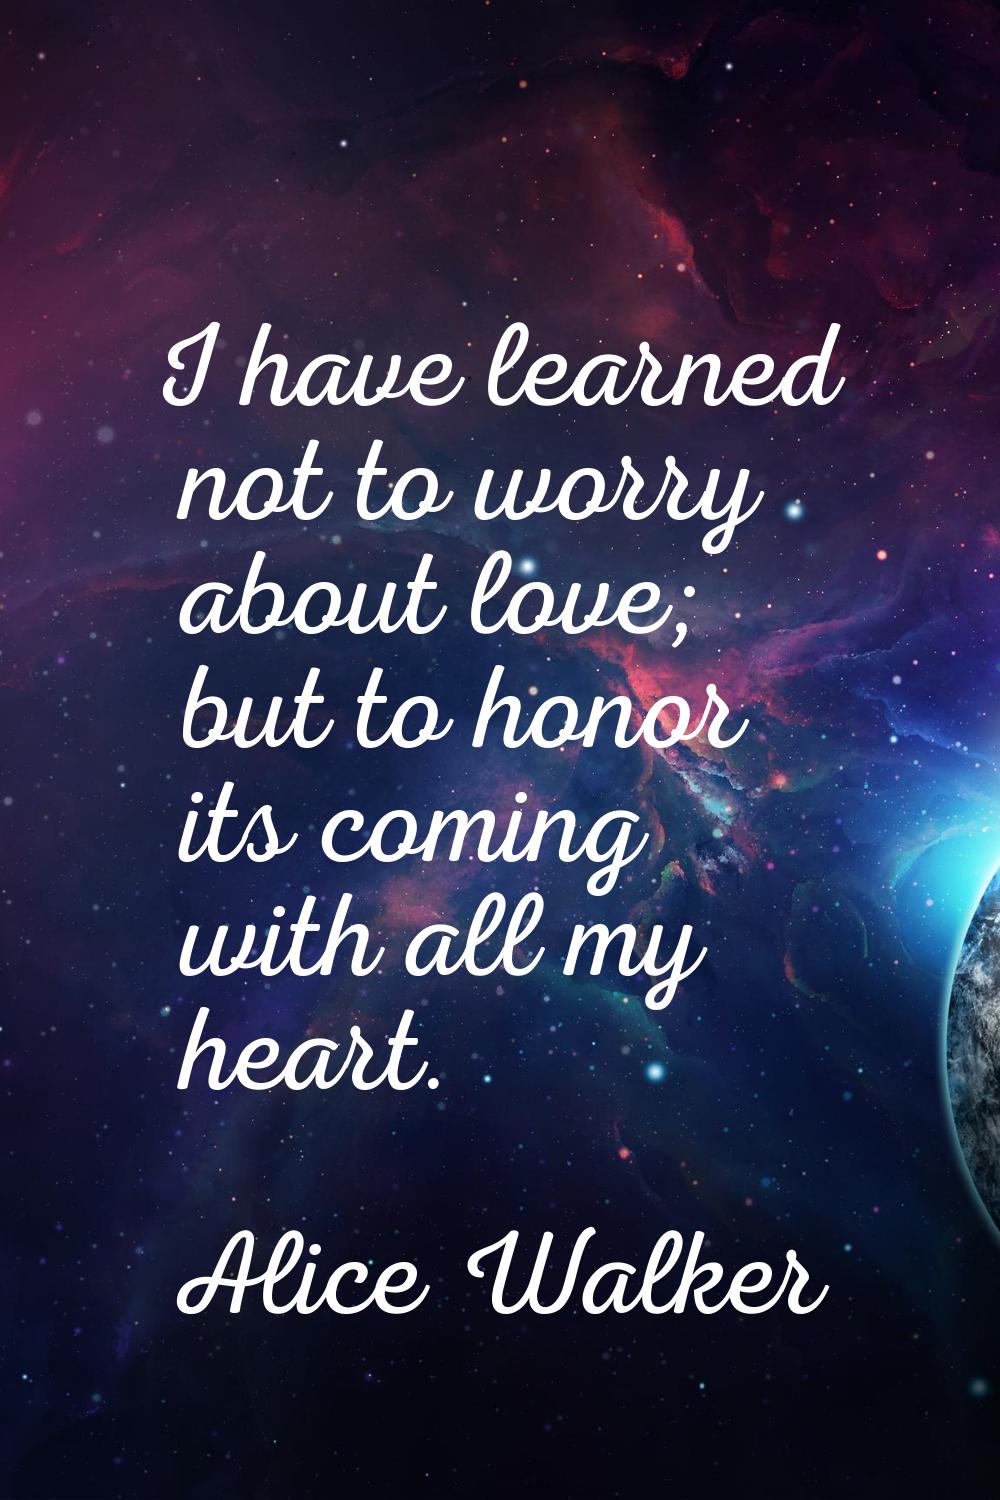 I have learned not to worry about love; but to honor its coming with all my heart.